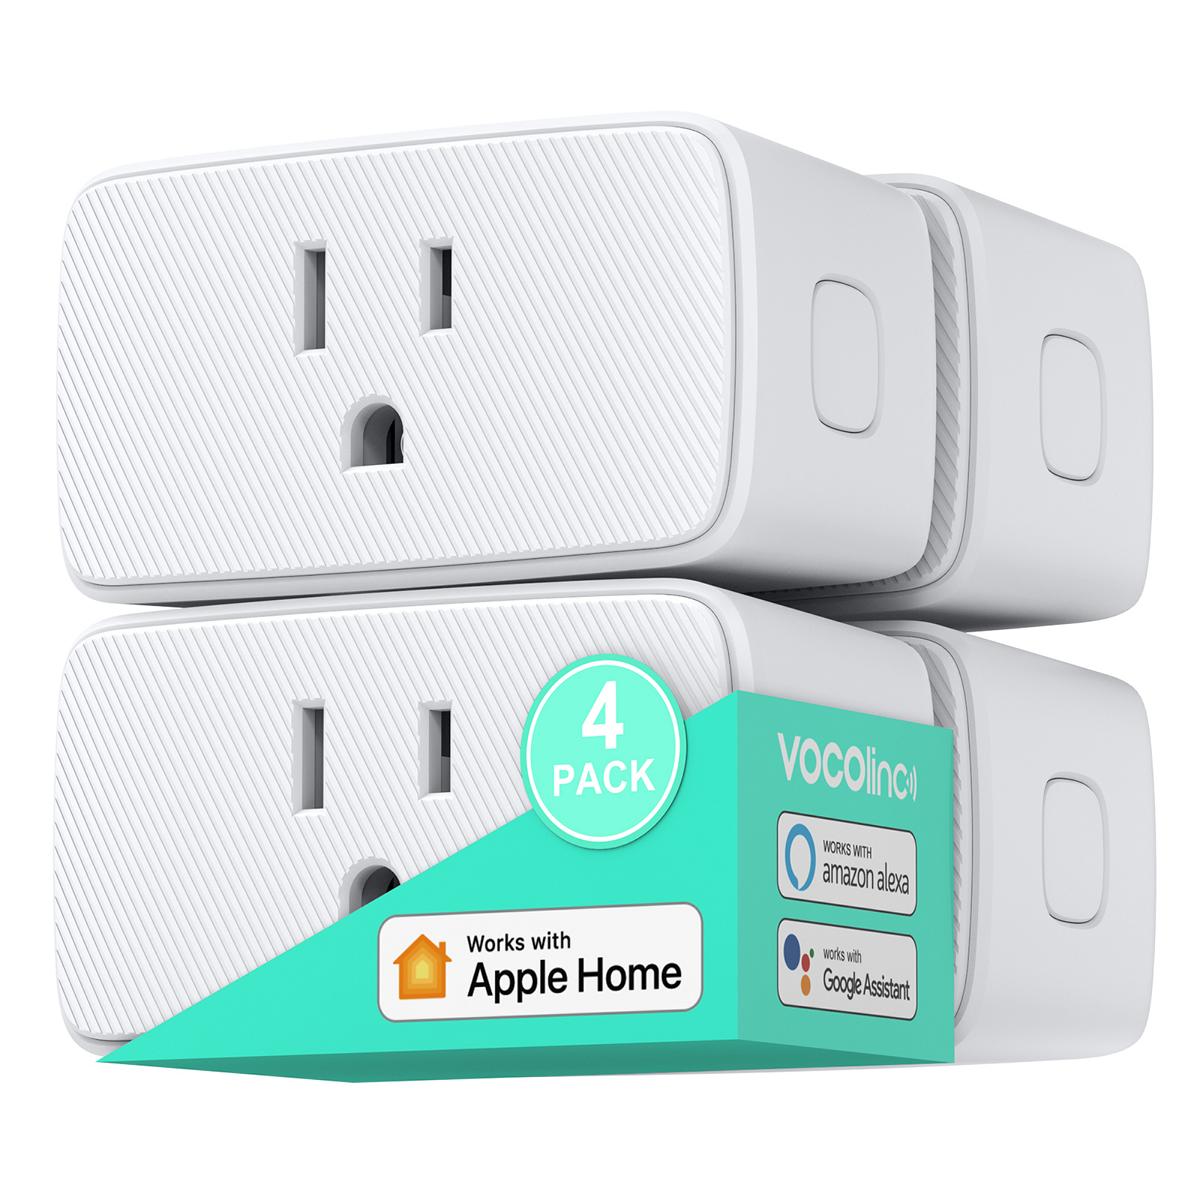 Teckin Smart Plug,Mini WiFi Outlet,Wireless SocketWorks with Alexa, Google Assistant, SmartThings with Timer Function (4 Pack)